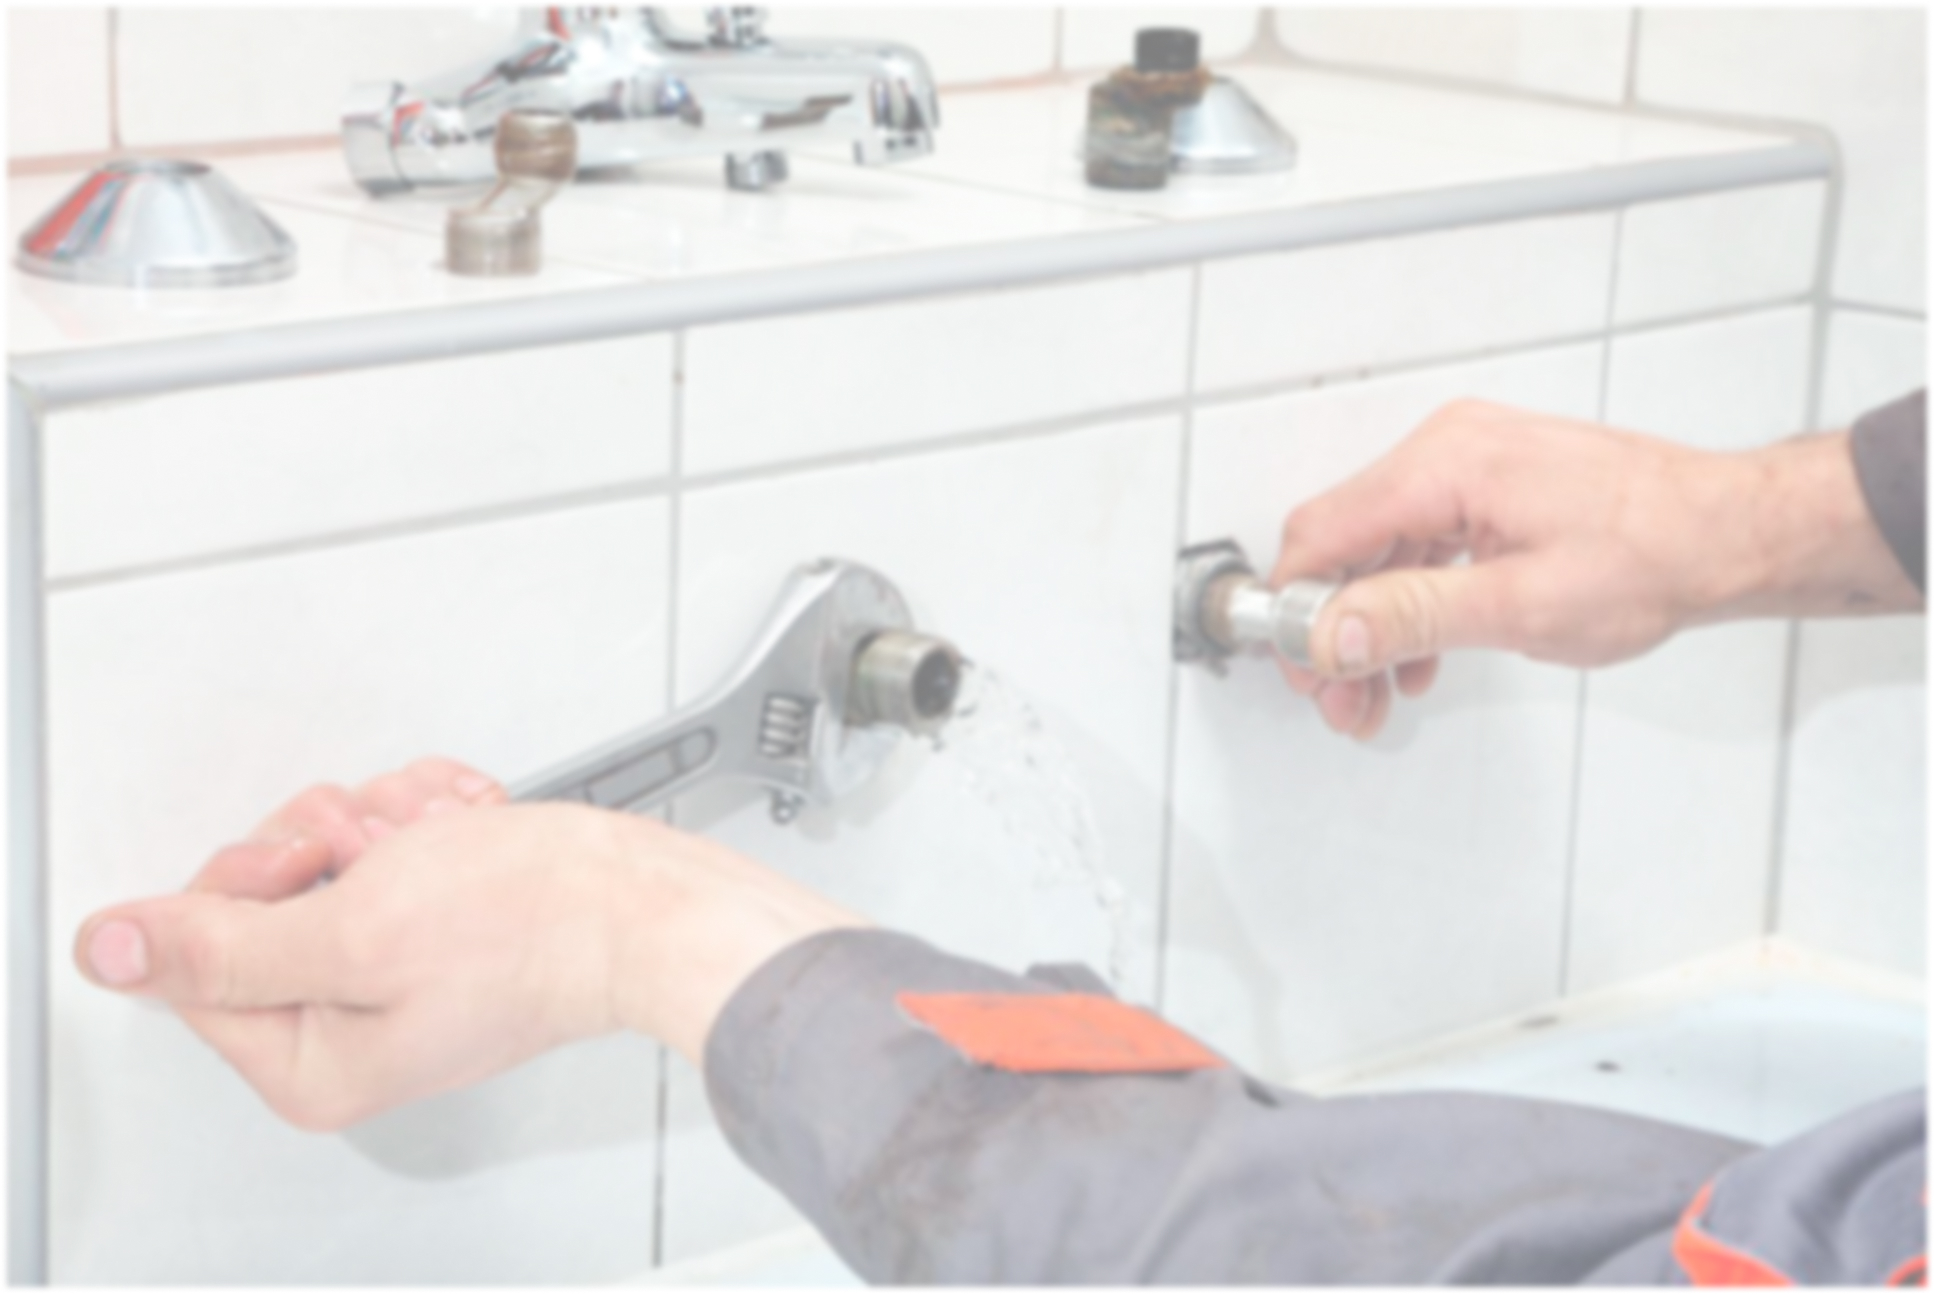 When would you need to call and emergency plumber?